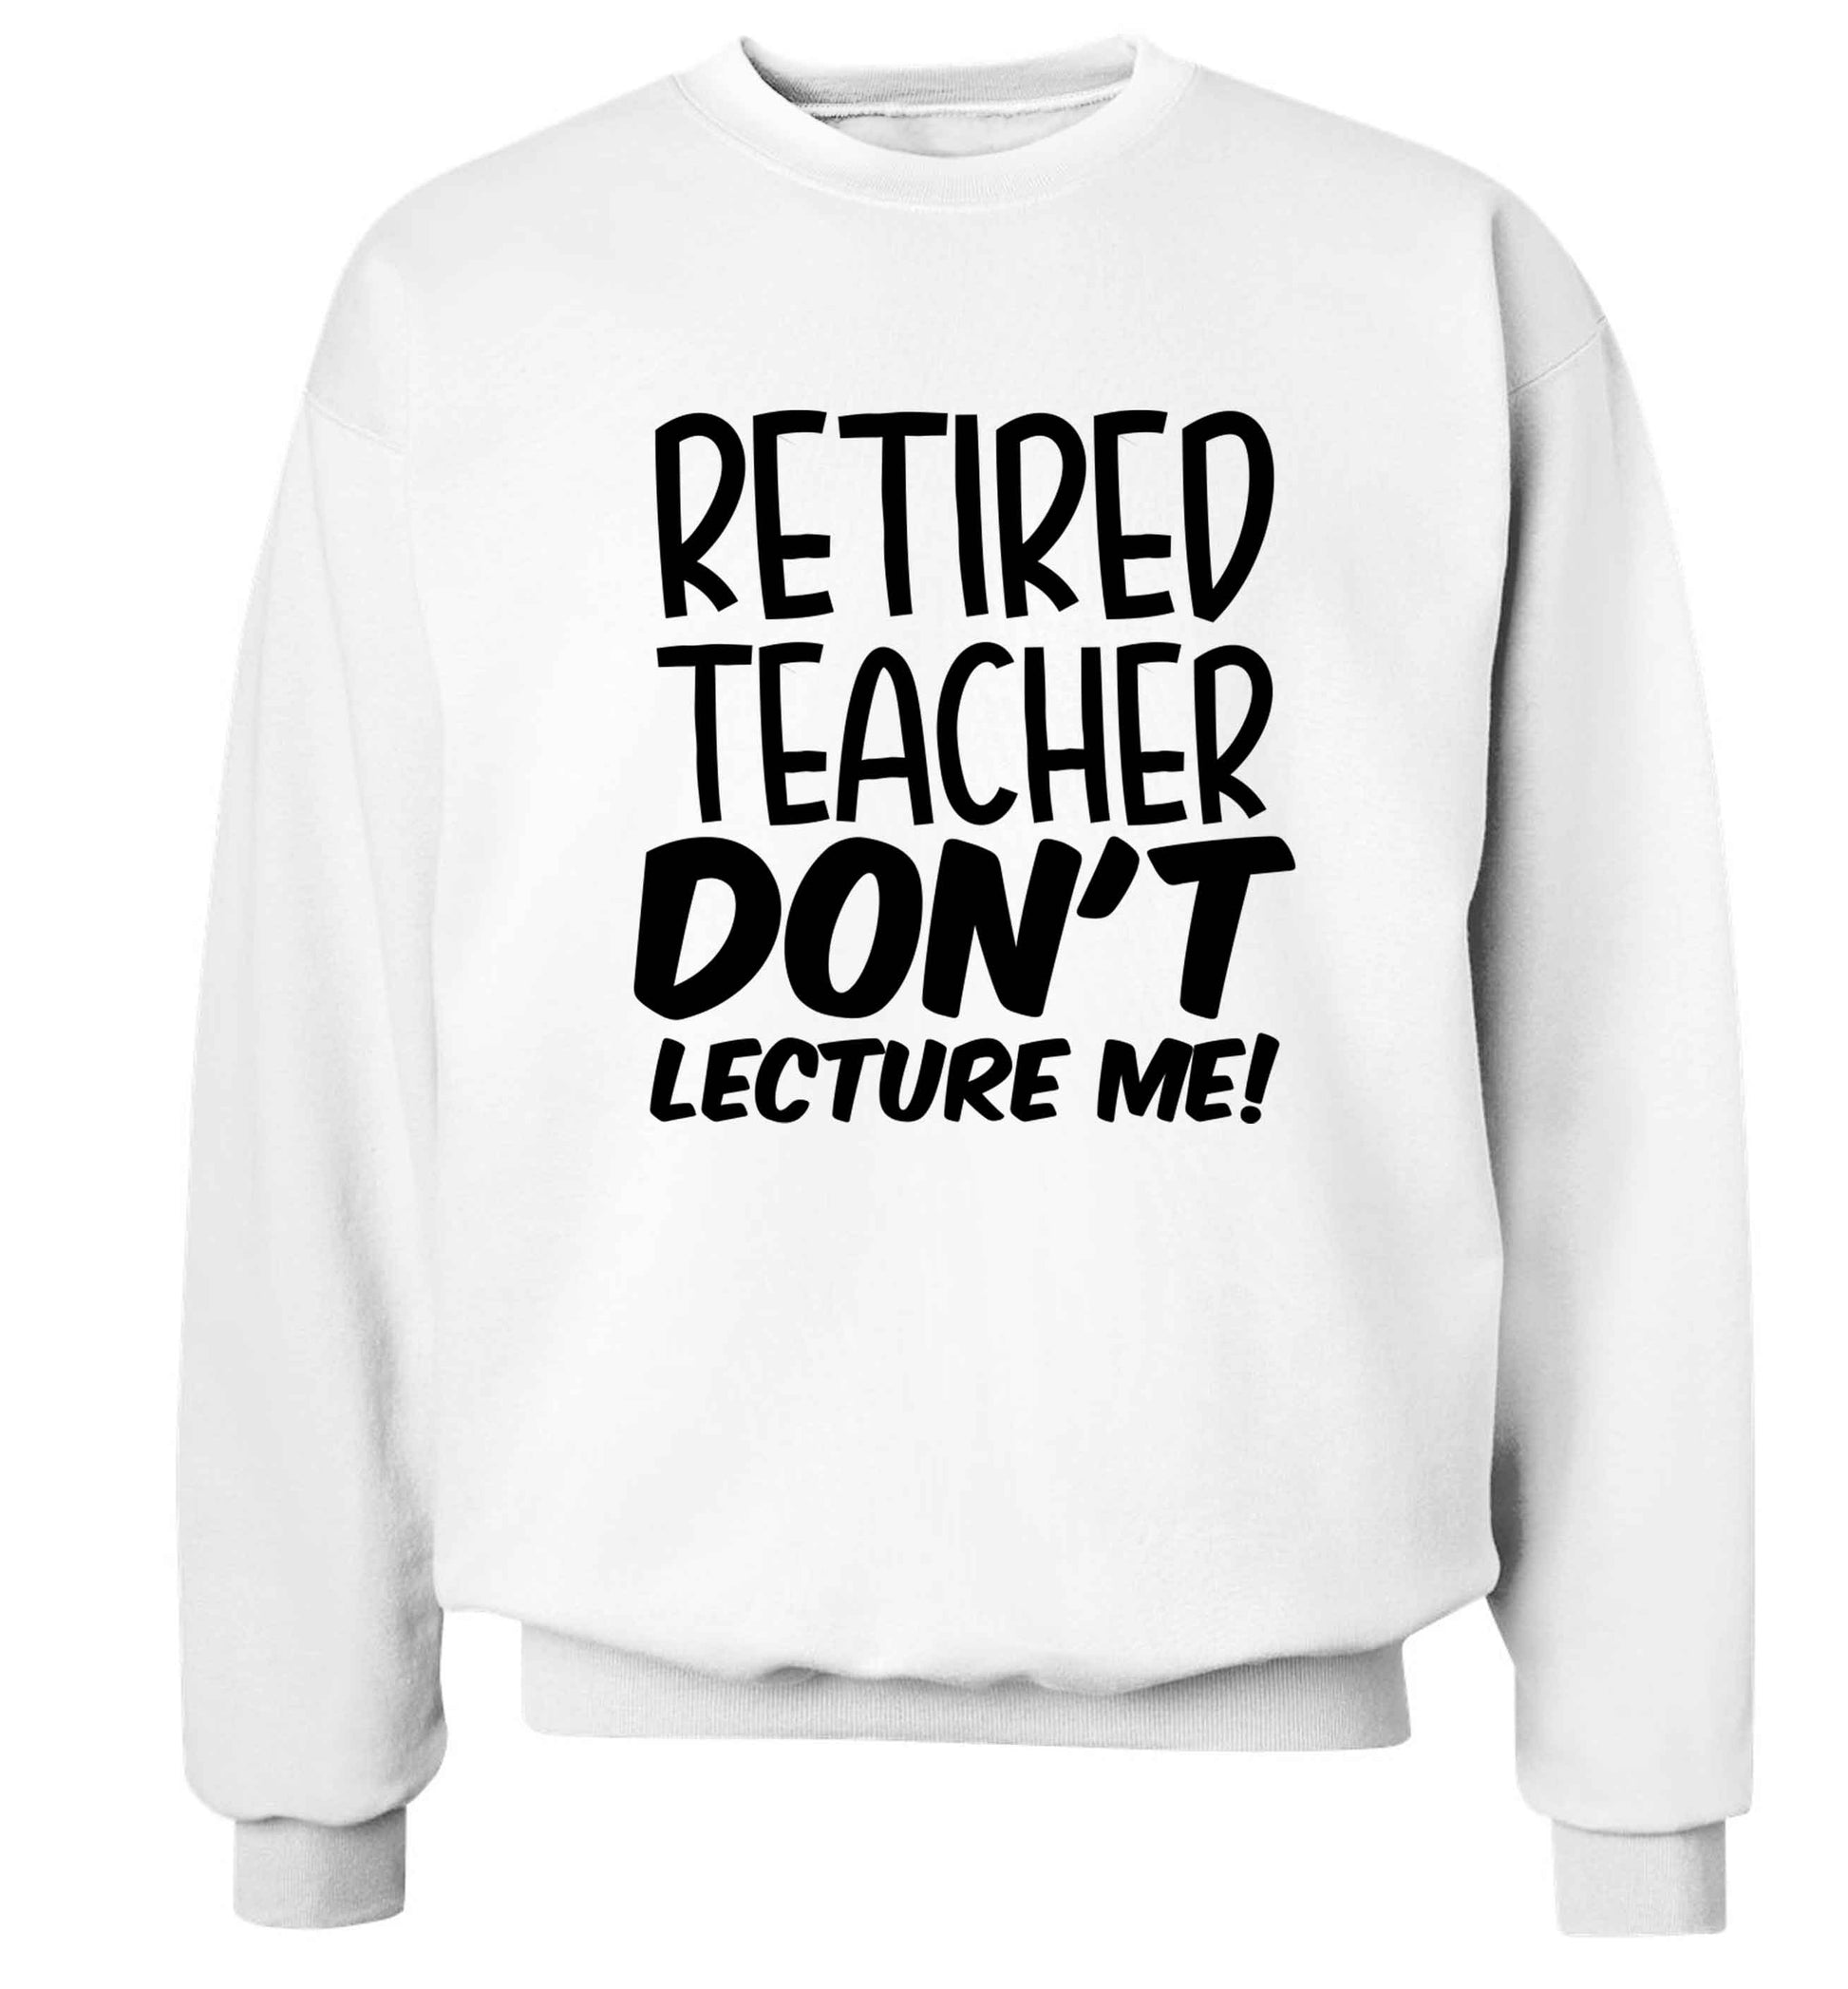 Retired teacher don't lecture me! Adult's unisex white Sweater 2XL